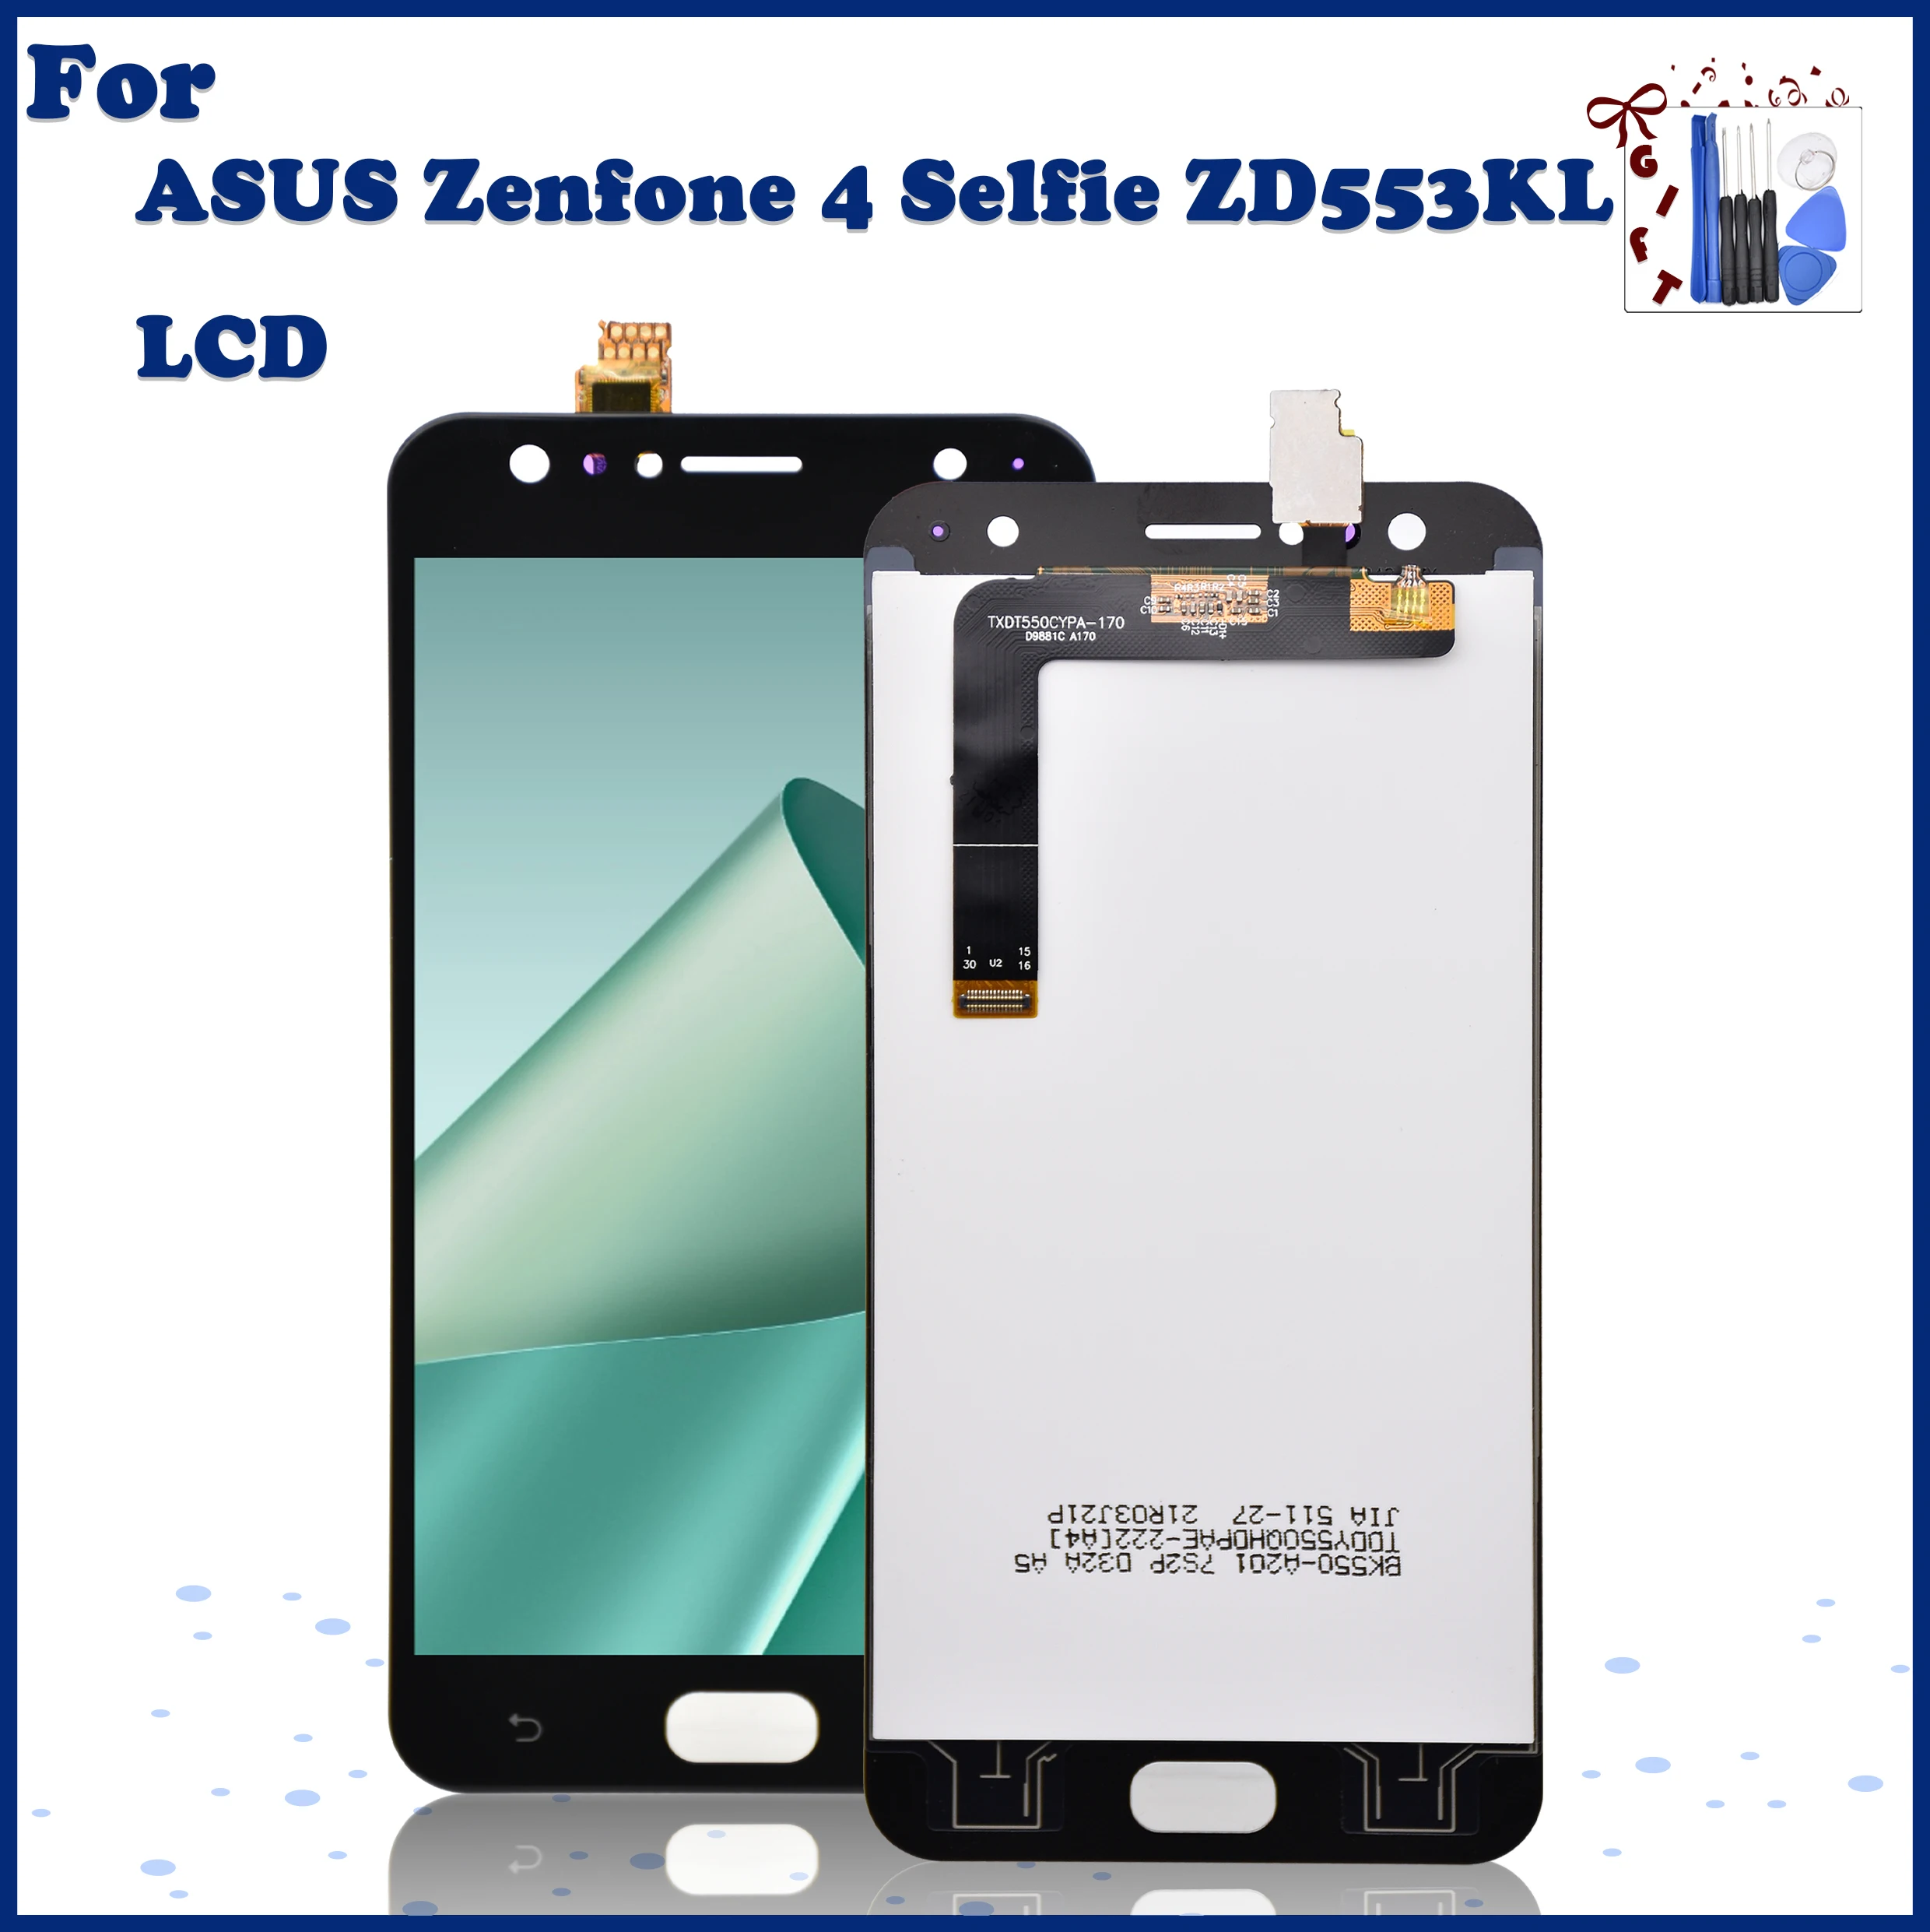 

Original 5.5"Inch For ASUS Zenfone 4 Selfie ZD553KL X00LD LCD Display Panel Touch Screen Digitizer Assembly For ZD553KL+Frame